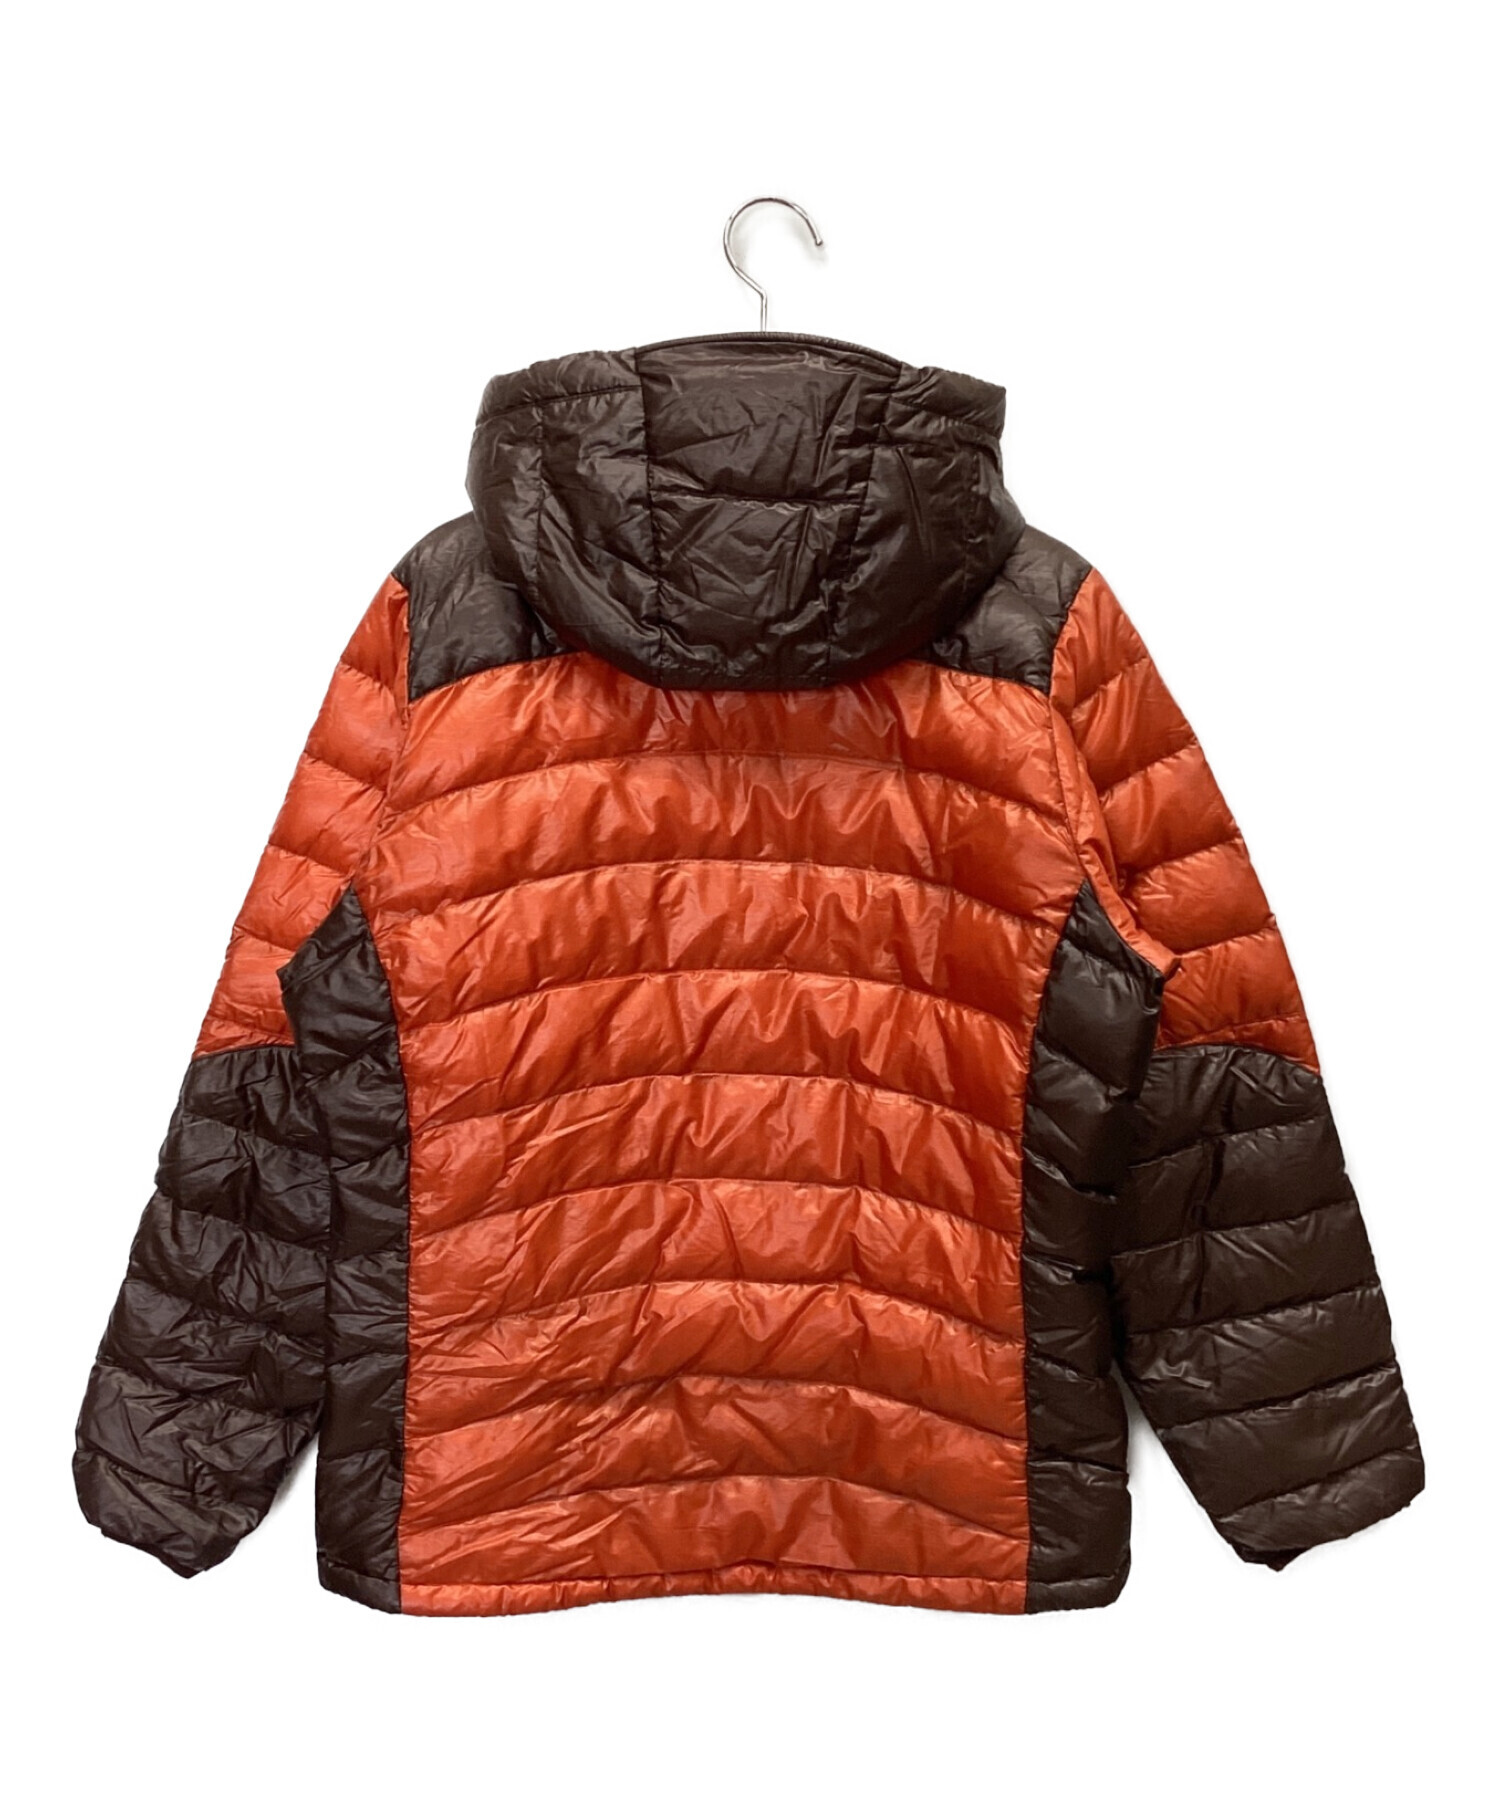 montbell puffer jacket オレンジ - bmplast.pe